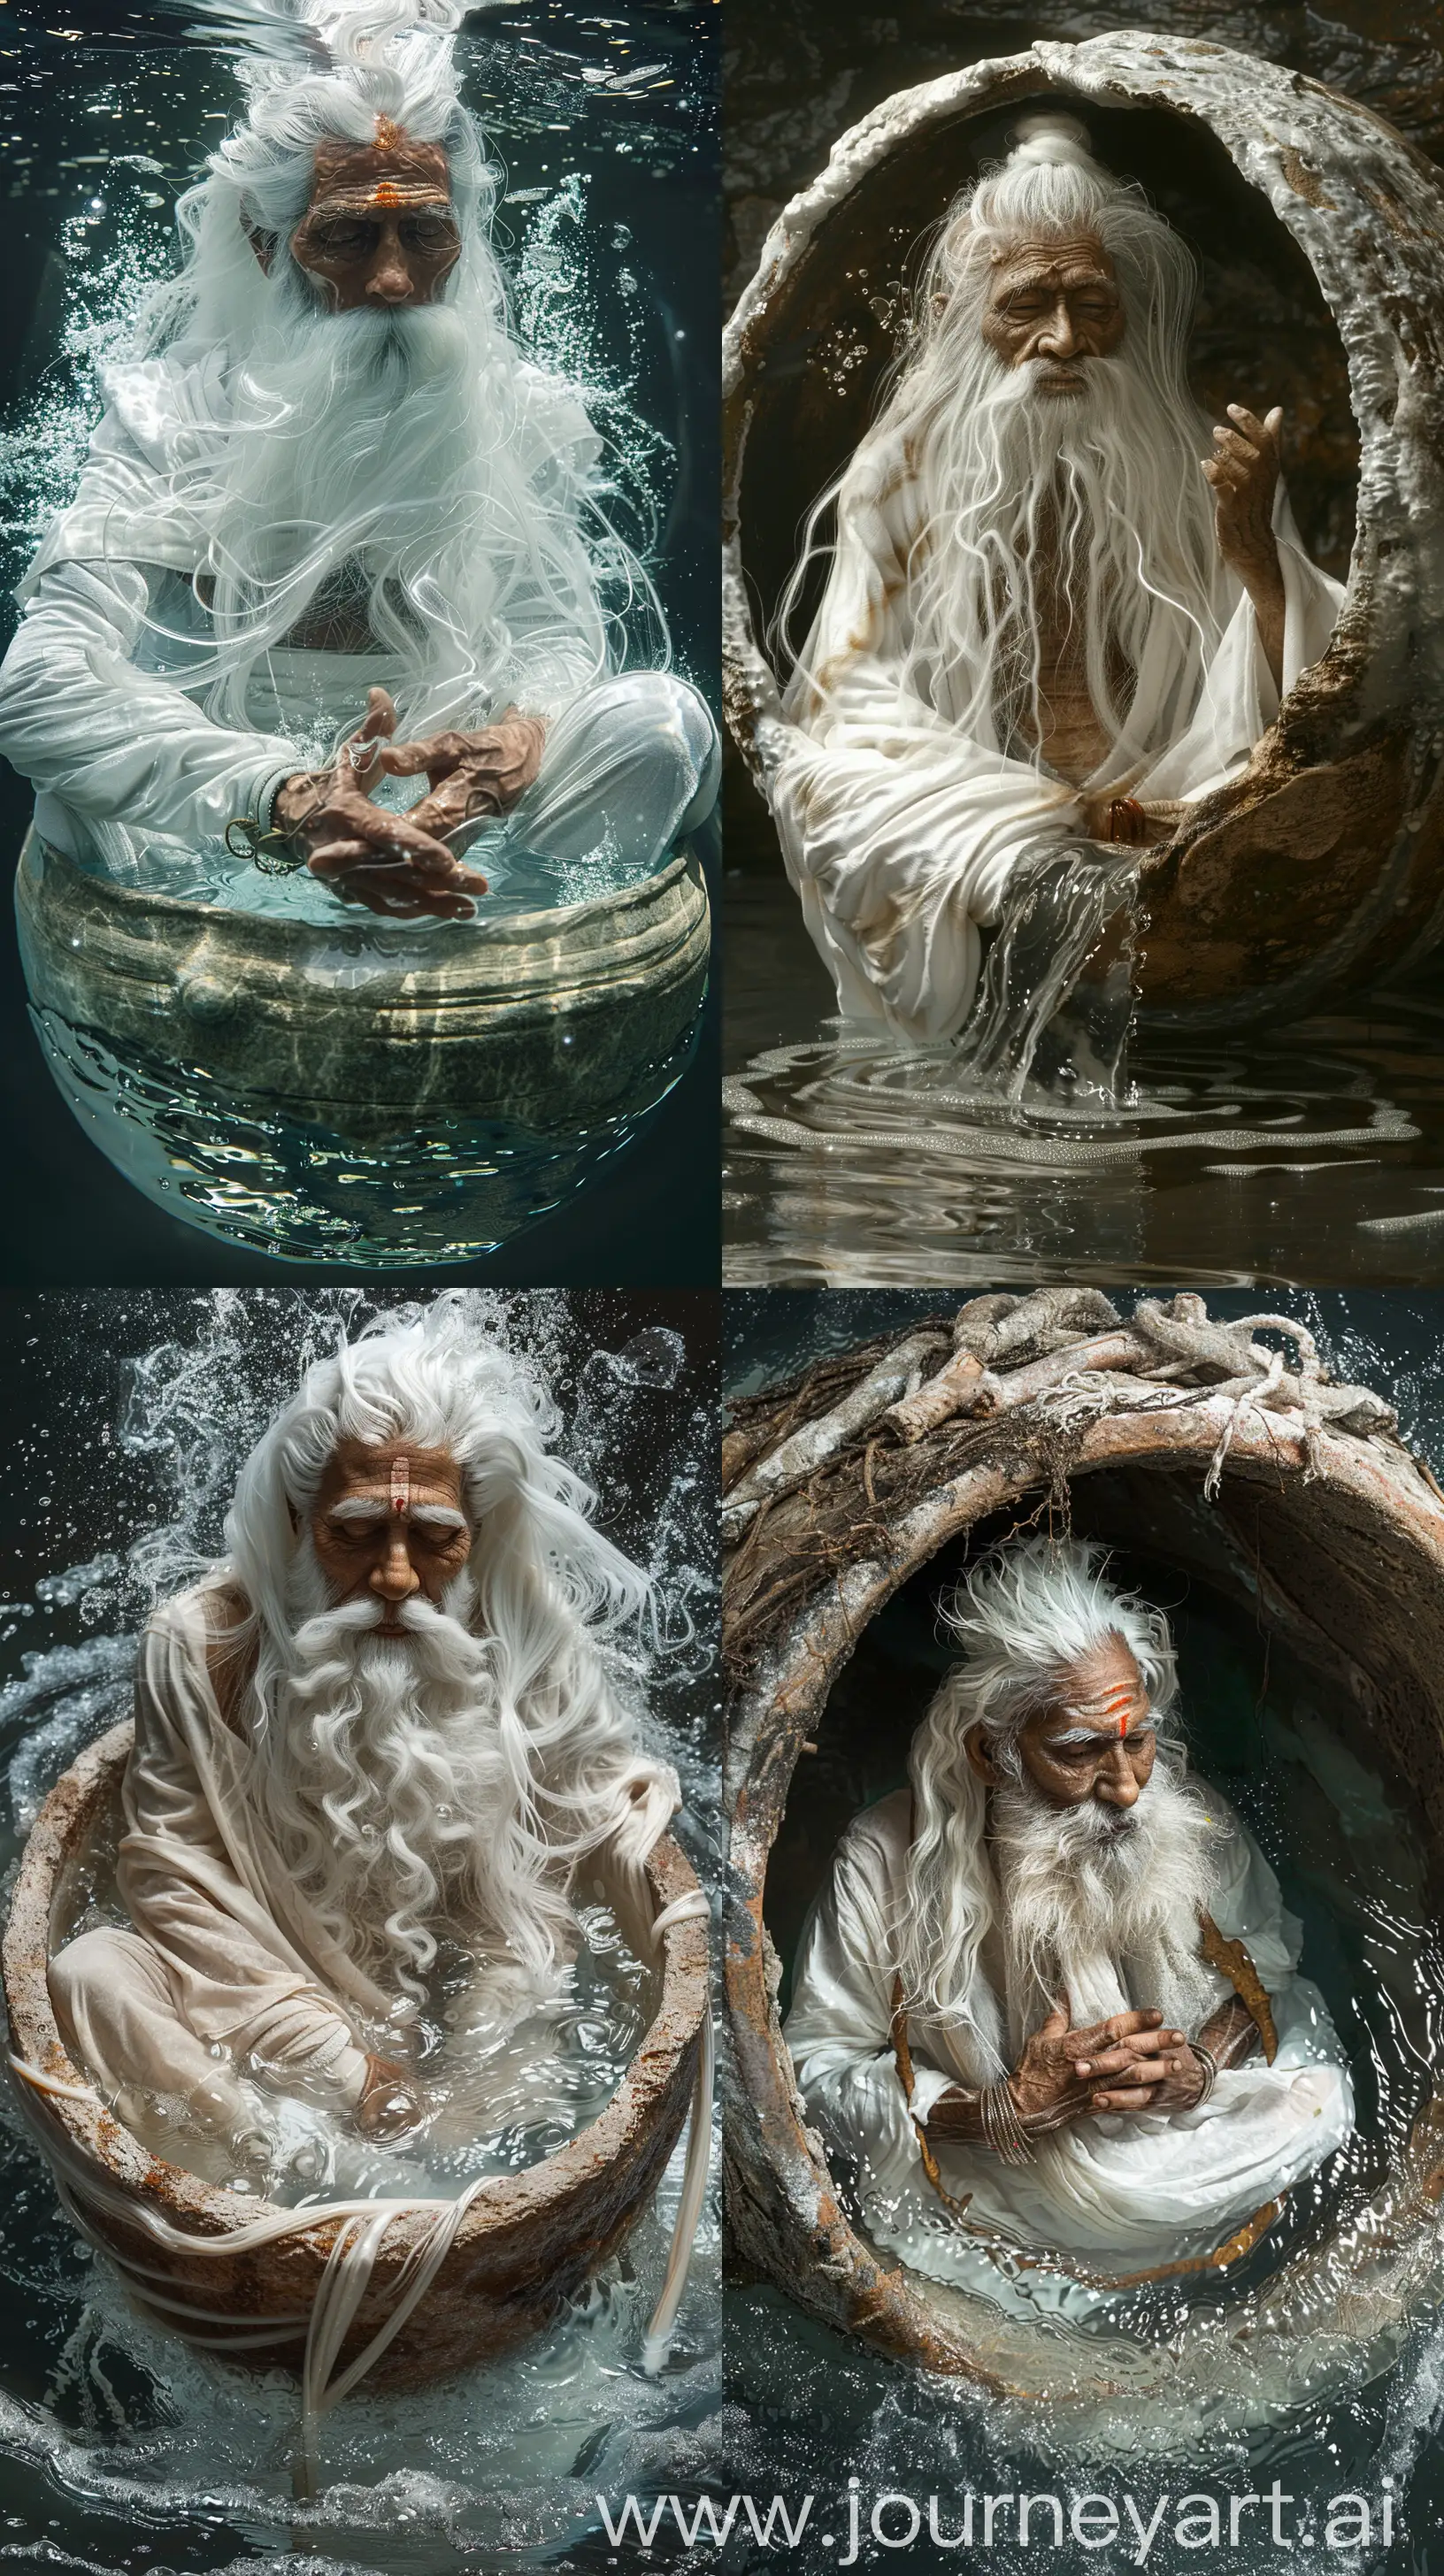 Ethereal-Elderly-Sage-Submerged-in-Serenity-A-Captivating-Portrait